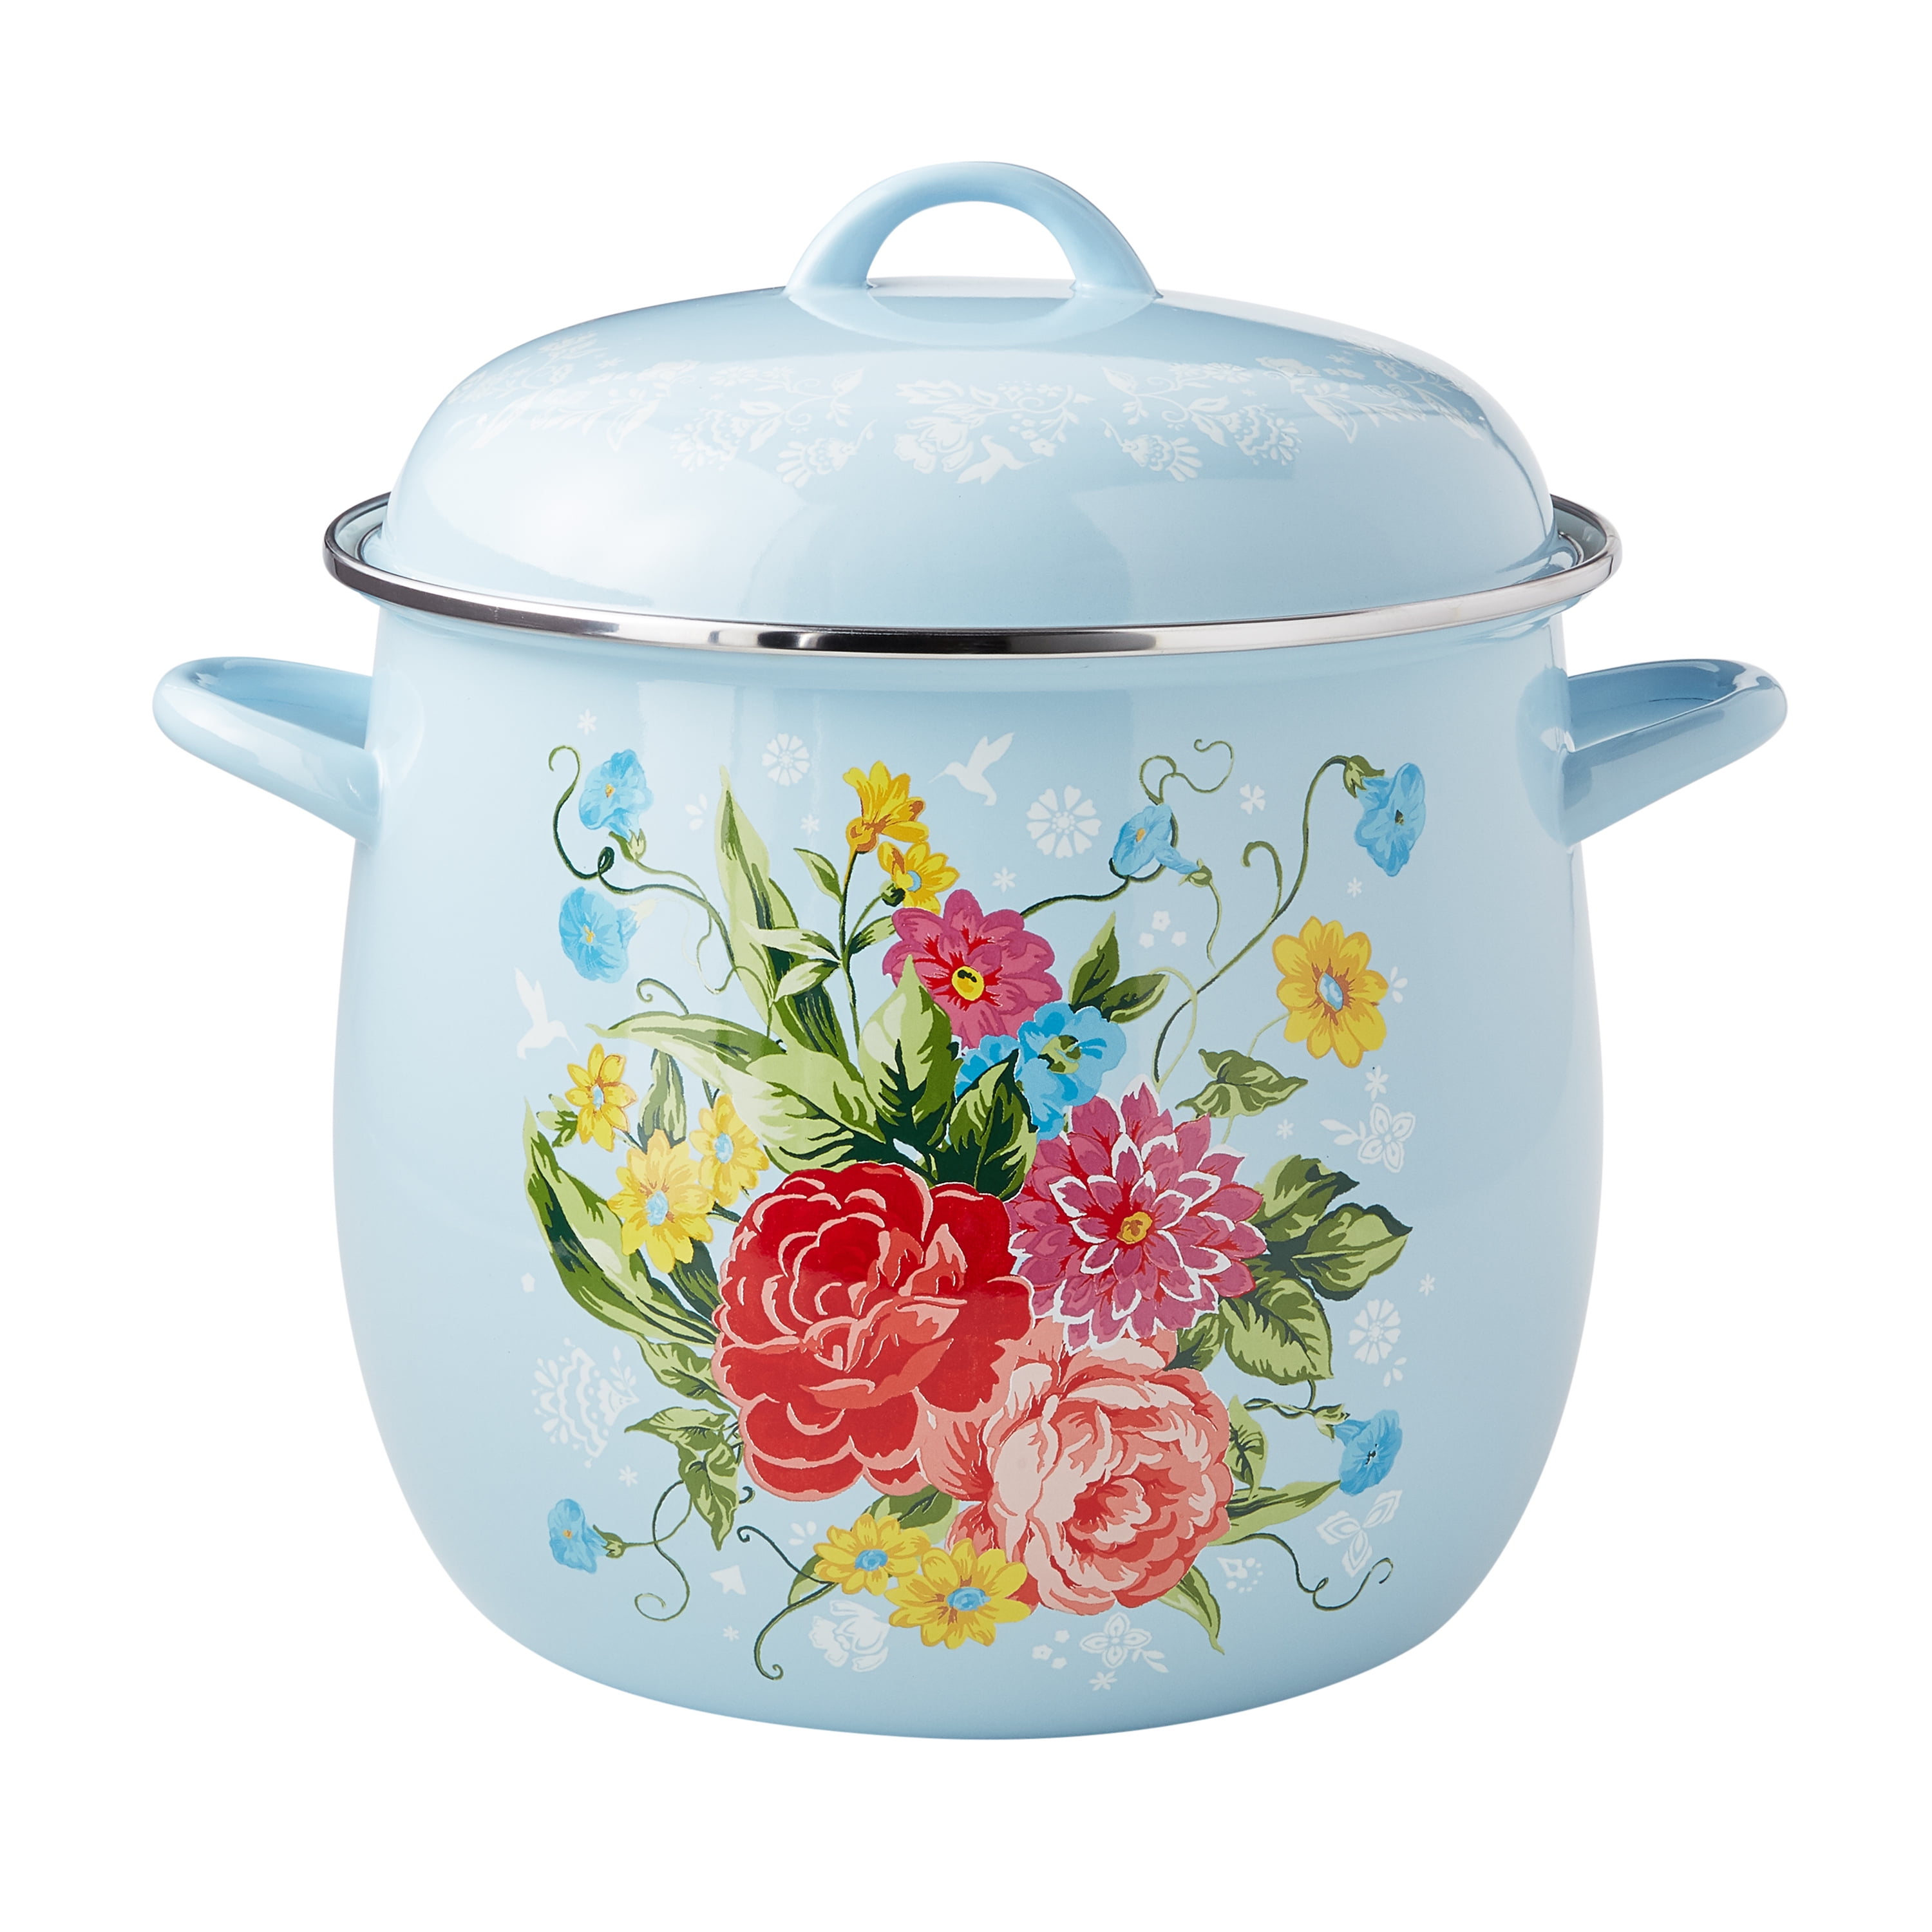 The Pioneer Woman Vintage Floral 12 Quart Stock Pot, Turquoise